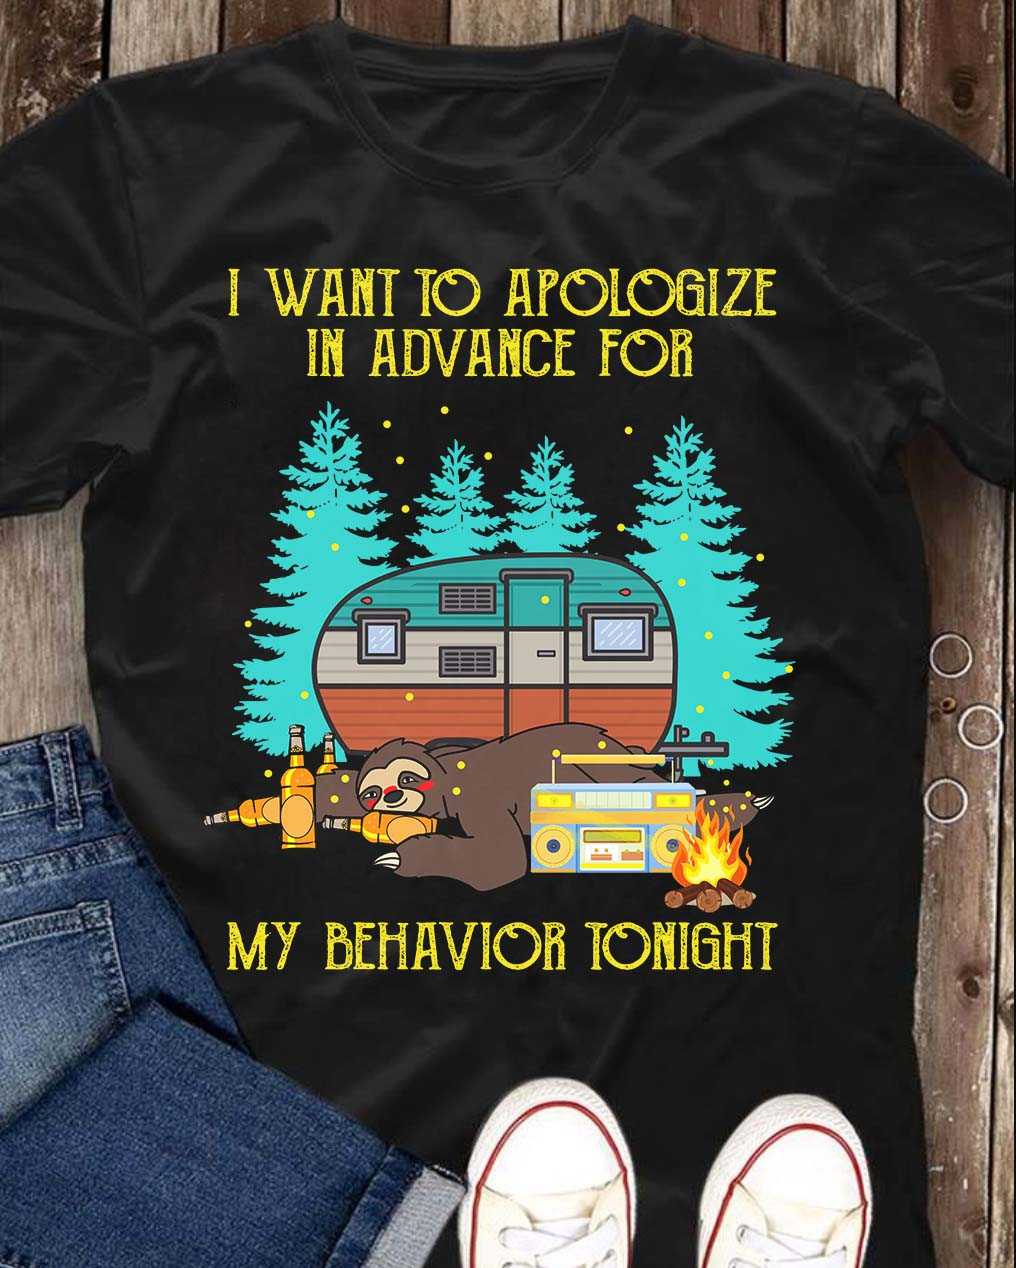 I want to apologize in advance for my behavior tonight - Drunk sloth, camping and drinking